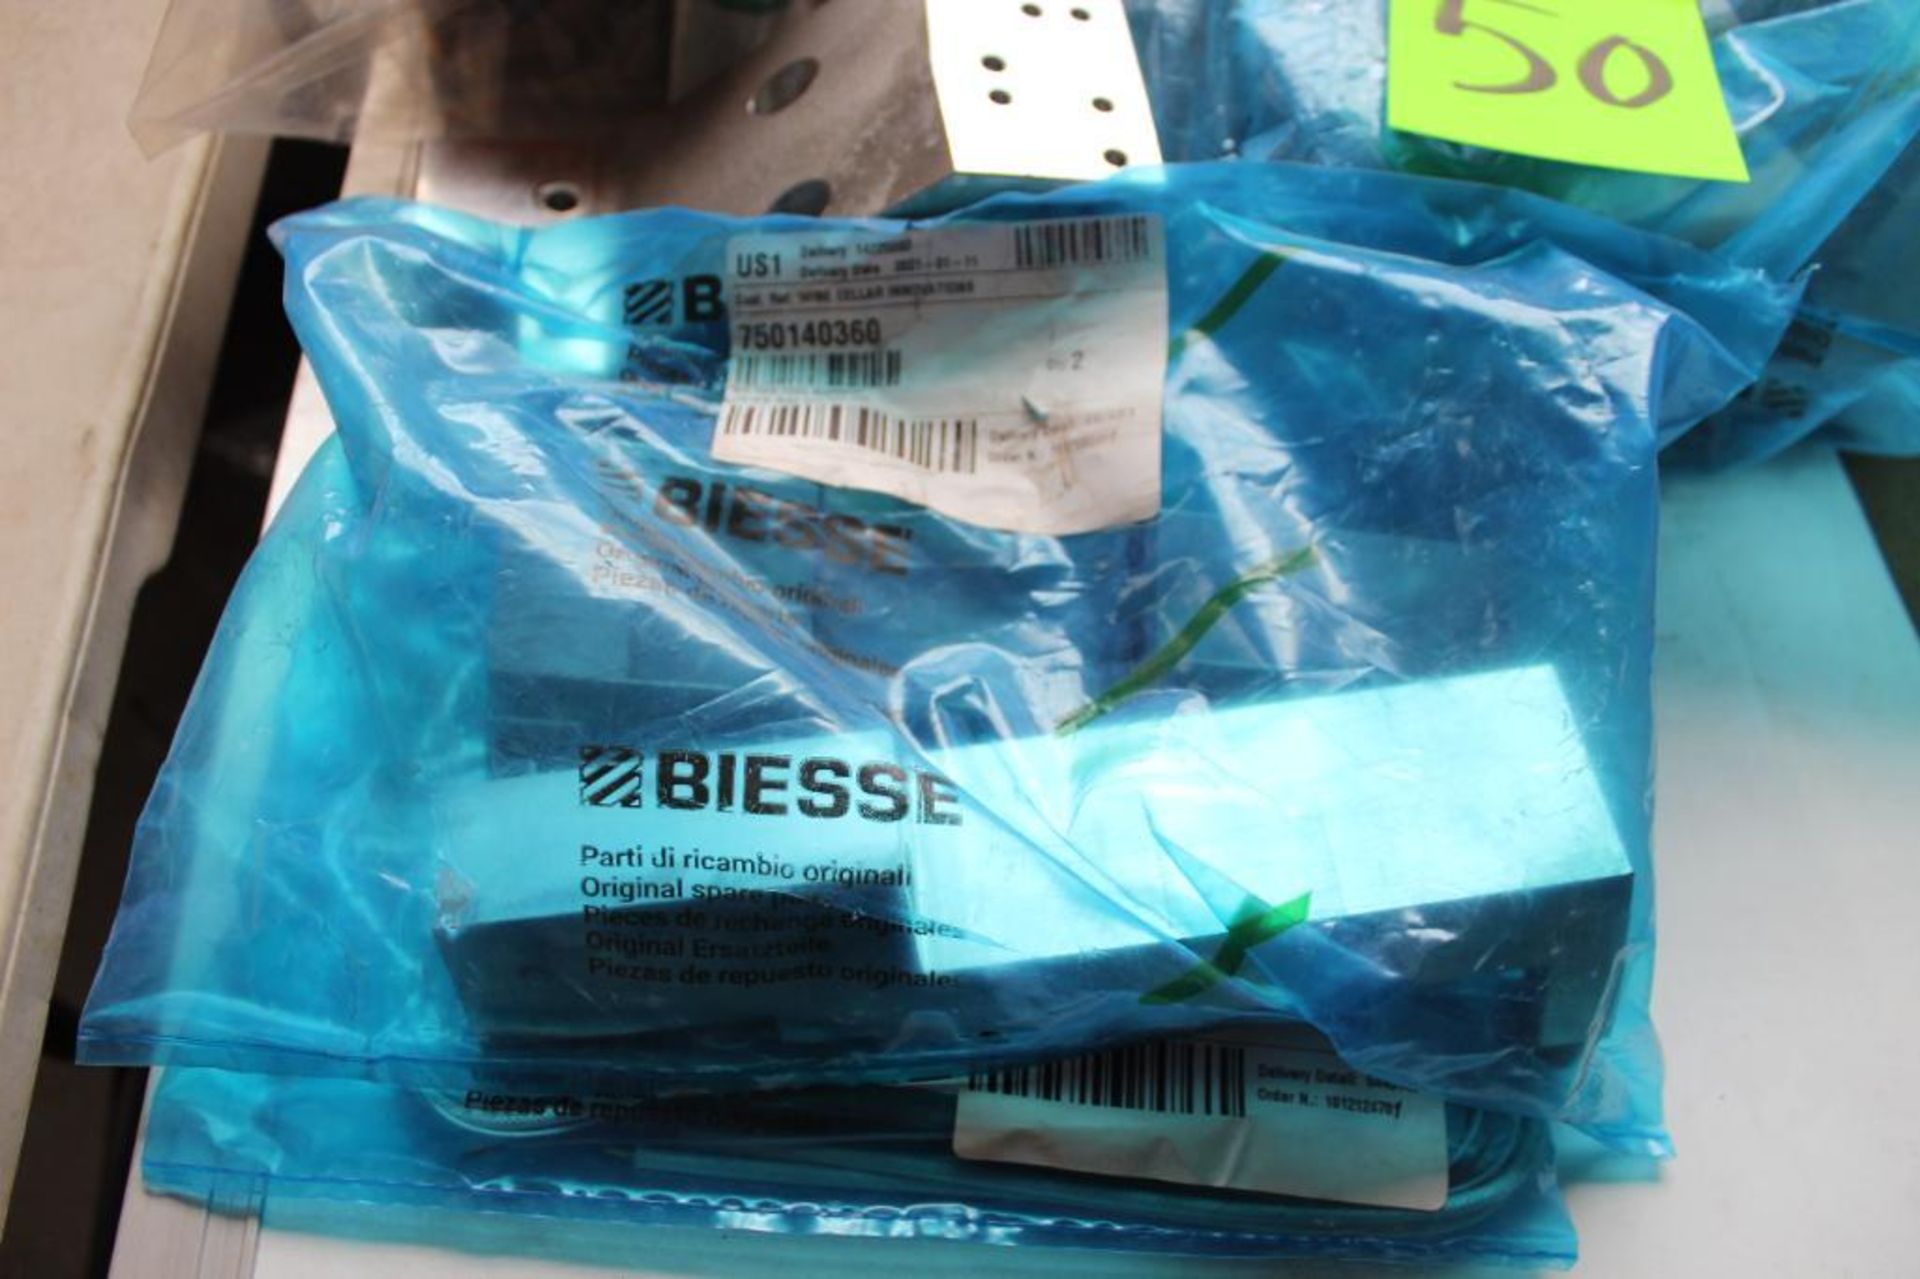 Biesse Pedal Operated Limit Switch Cable Clamp and Biesse Accessories - Image 6 of 6